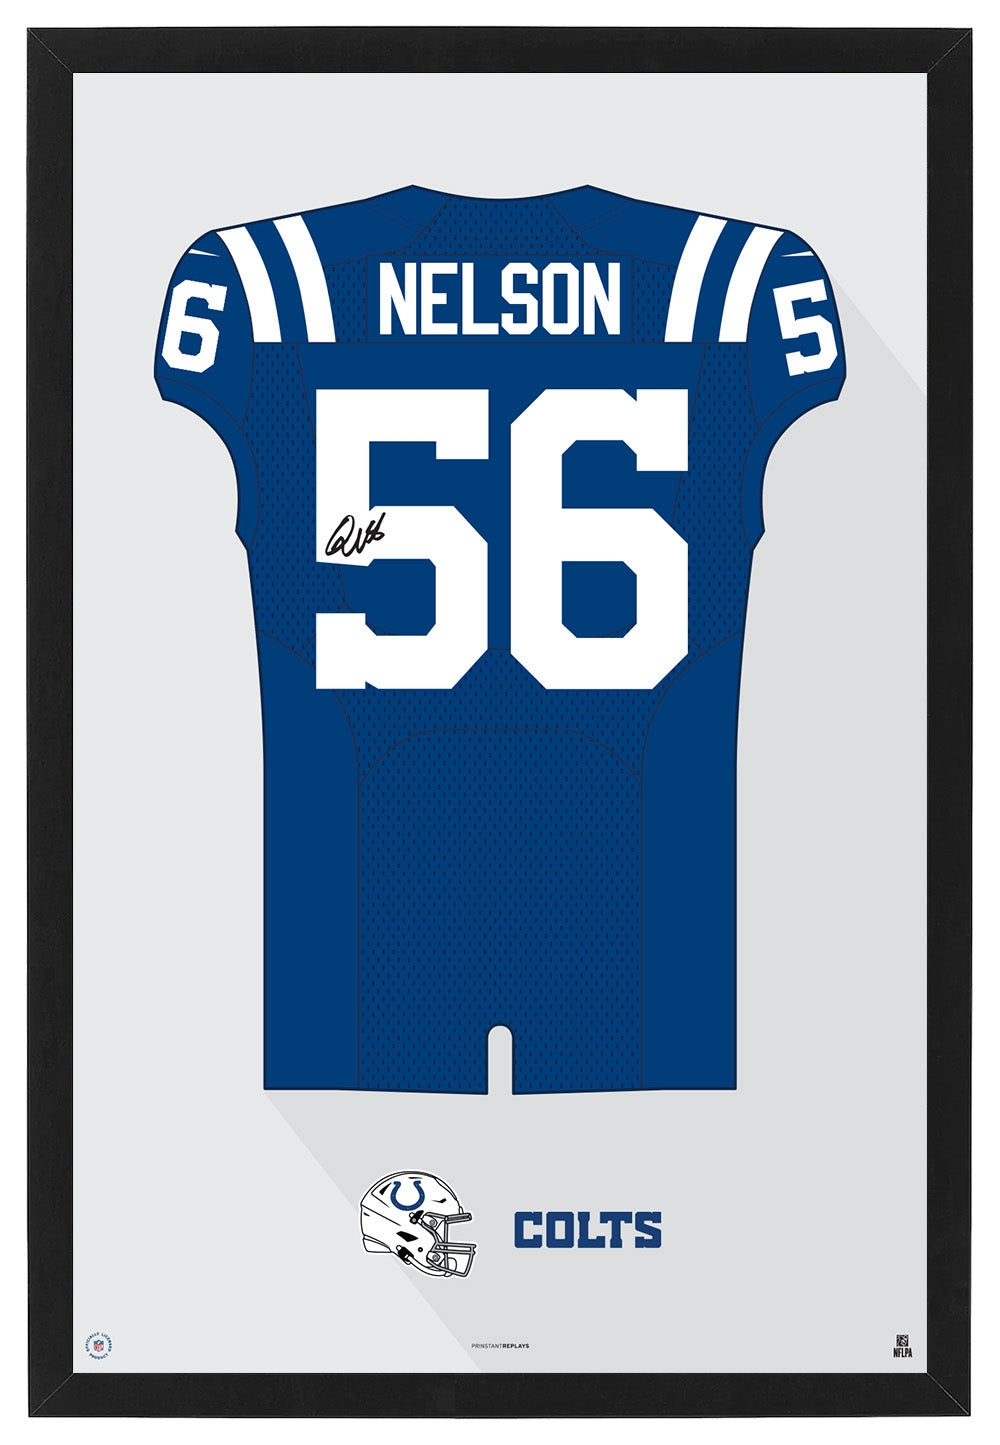 Indianapolis Colts Quinten Nelson Autographed Jersey Framed Print